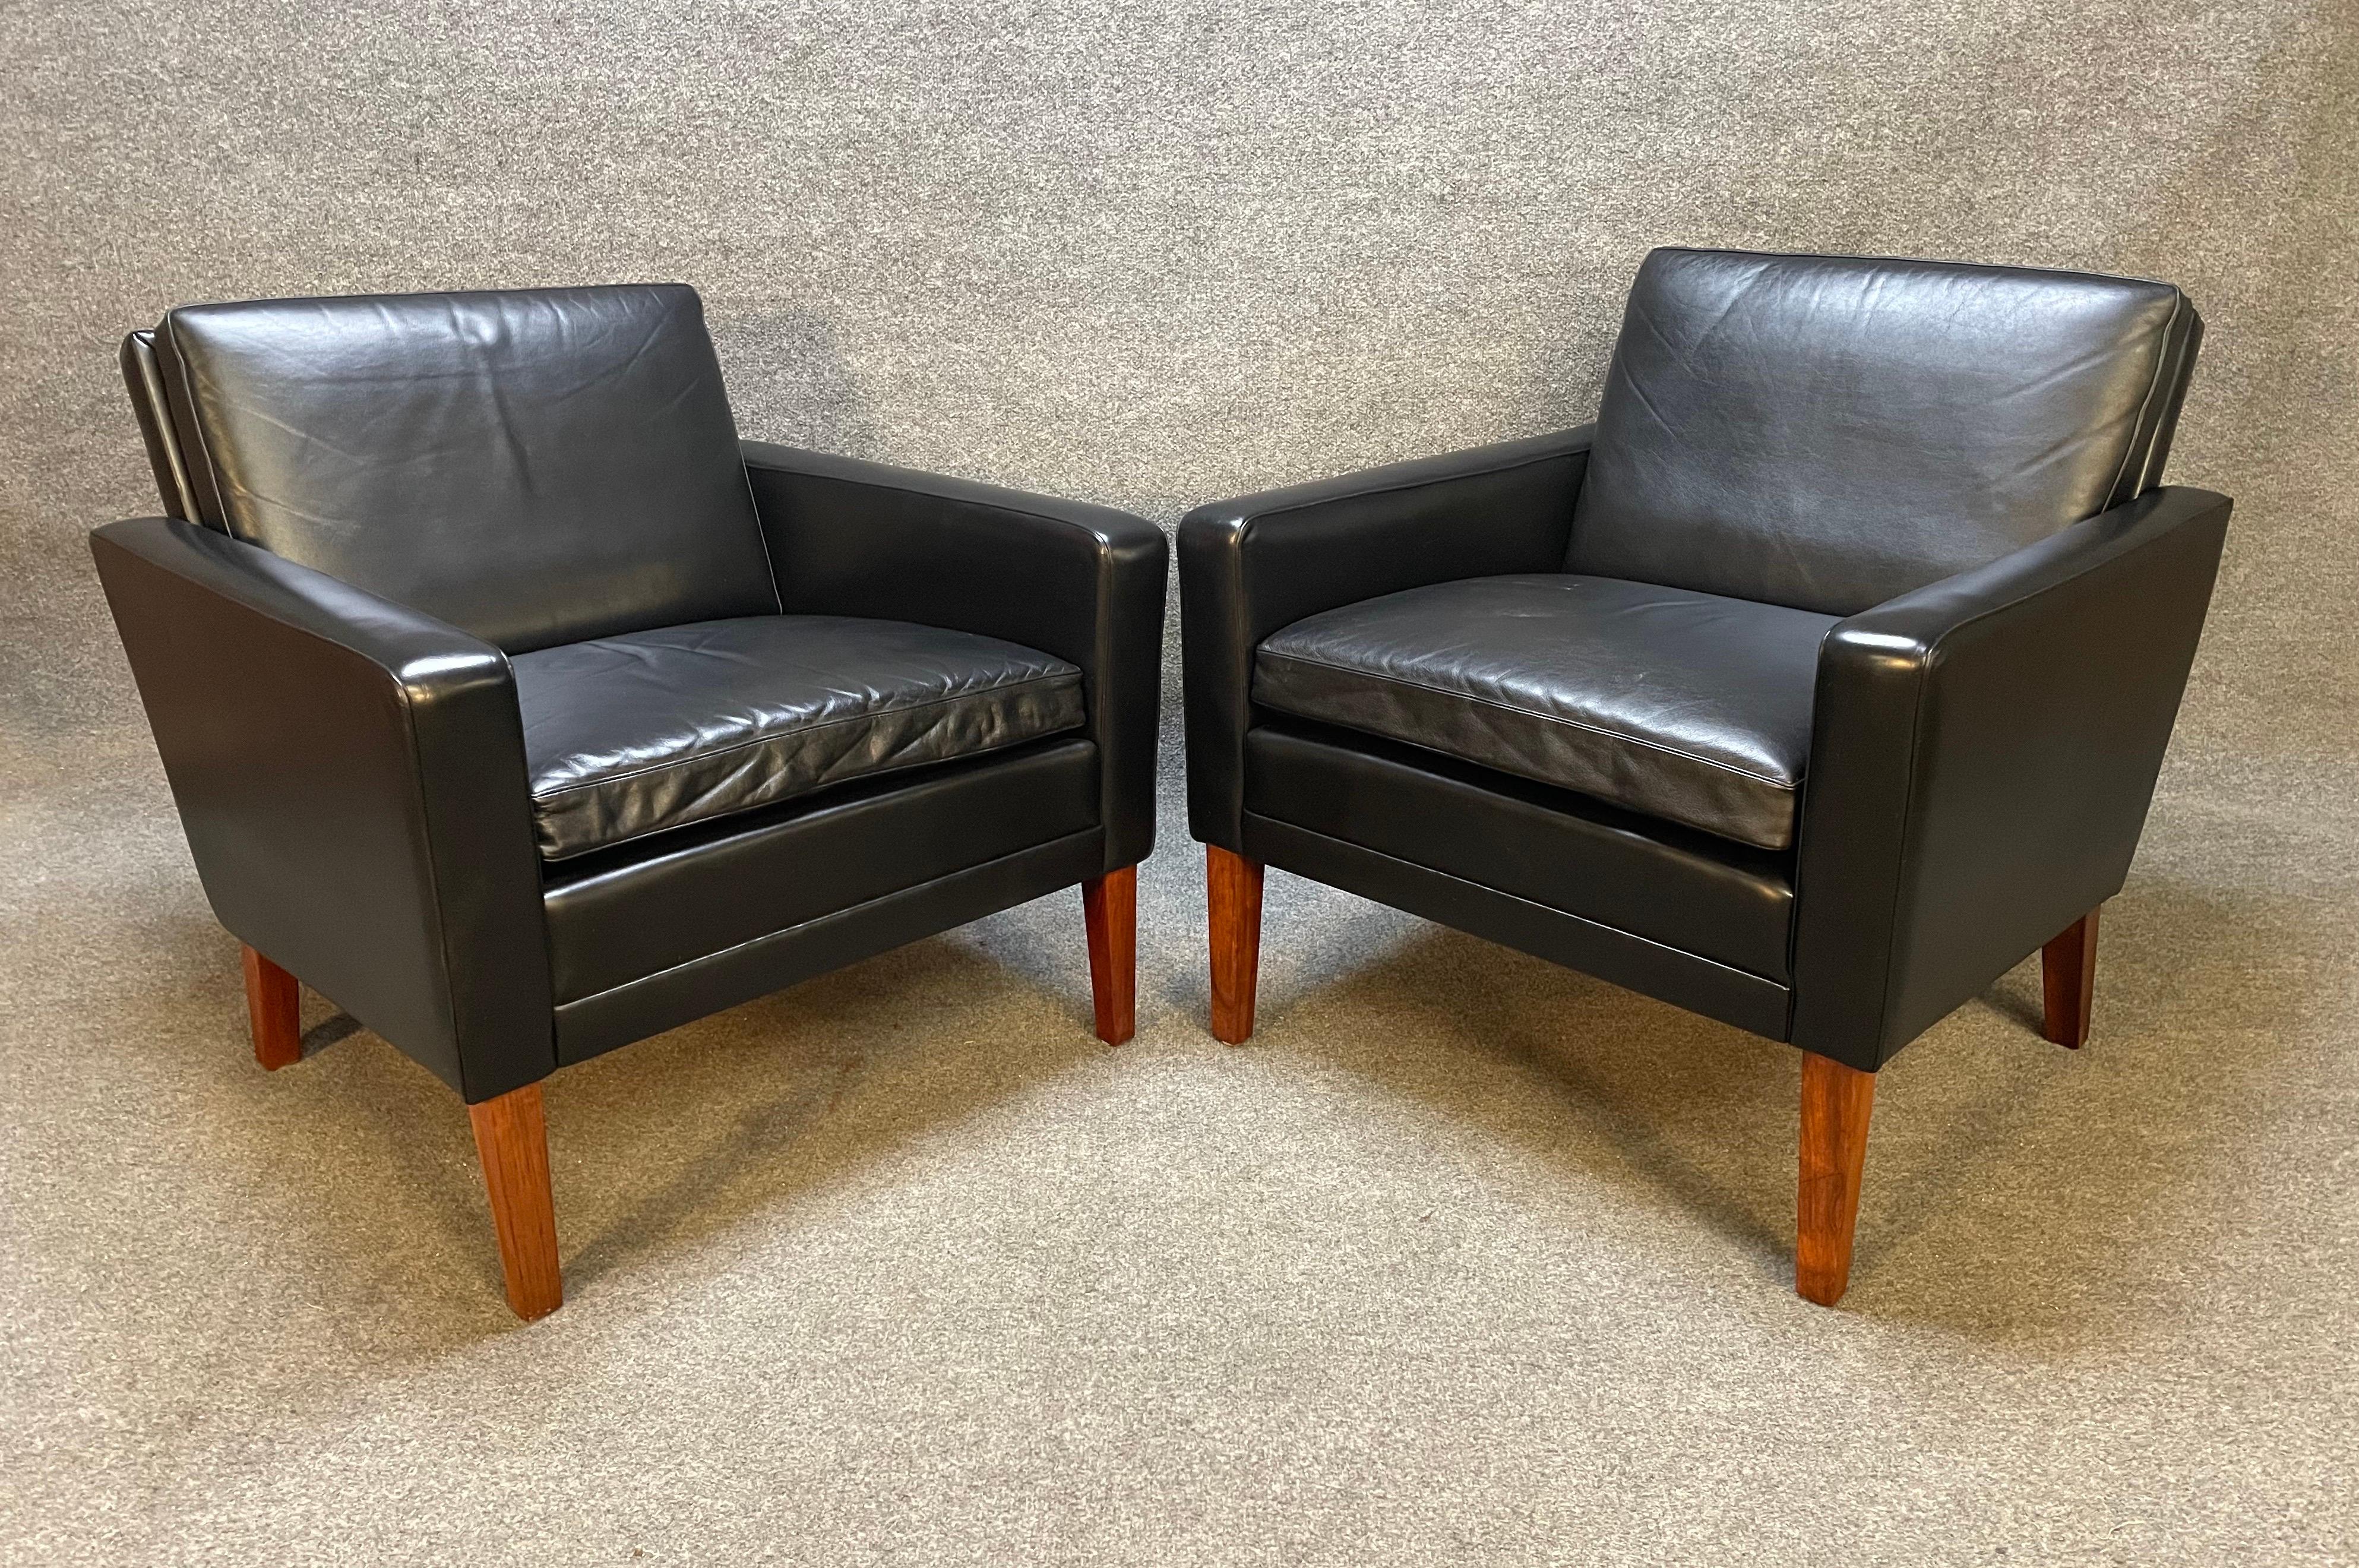 Here is a beautiful pair of 1960's Scandinavian club chairs in leather and rosewood recently imported from Denmark to California.
These two comfortable club chairs feature a full grain original patined black leather upholstery with solid rosewood